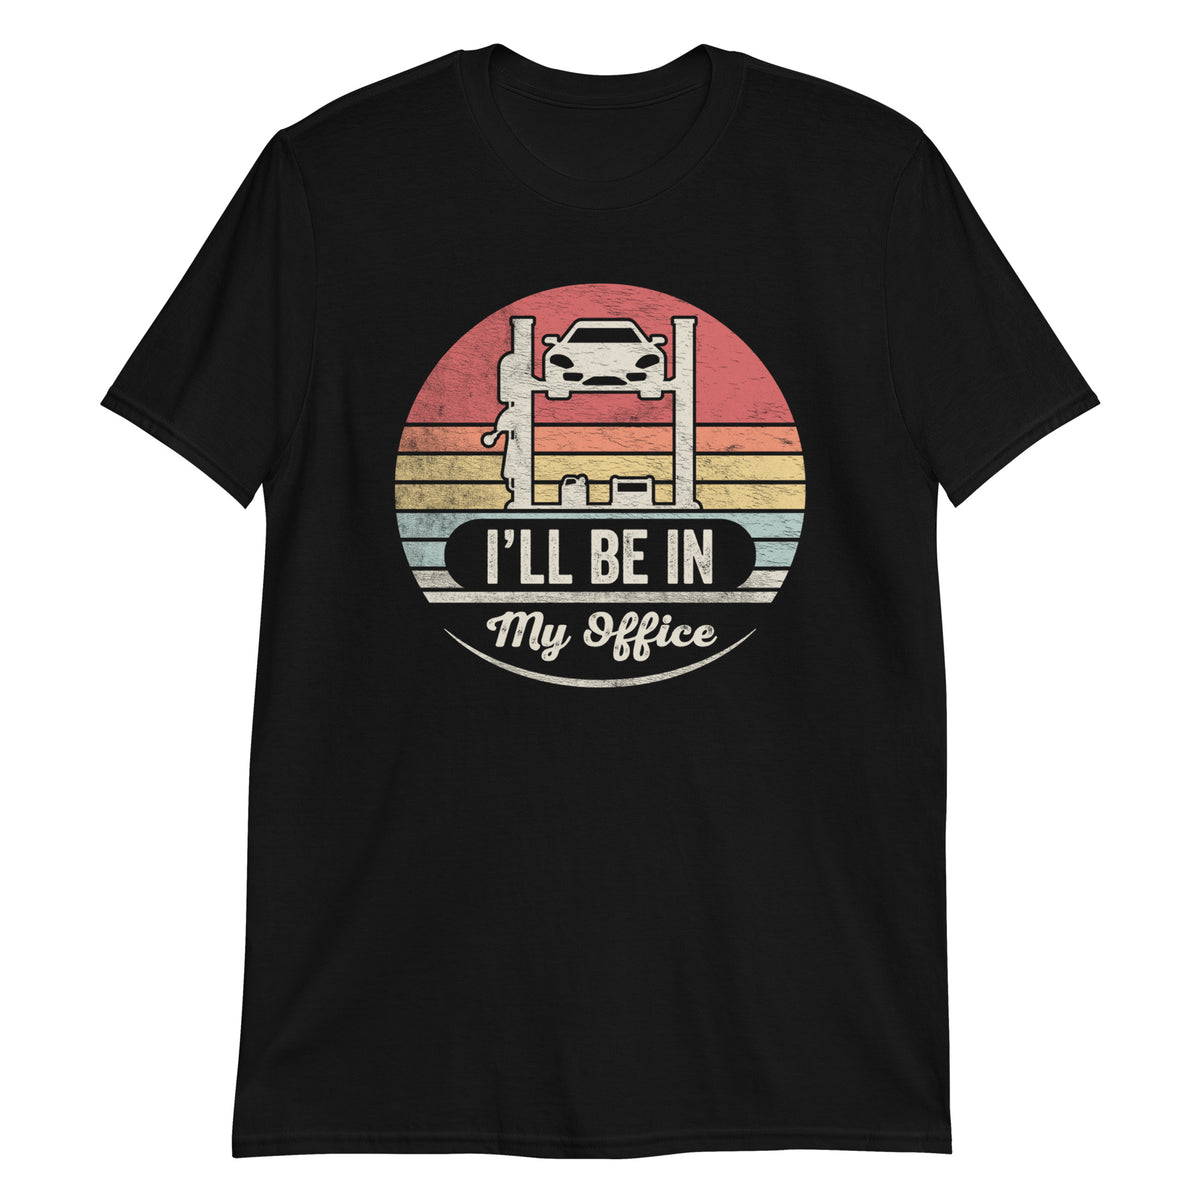 I'll Be In My Office T-Shirt